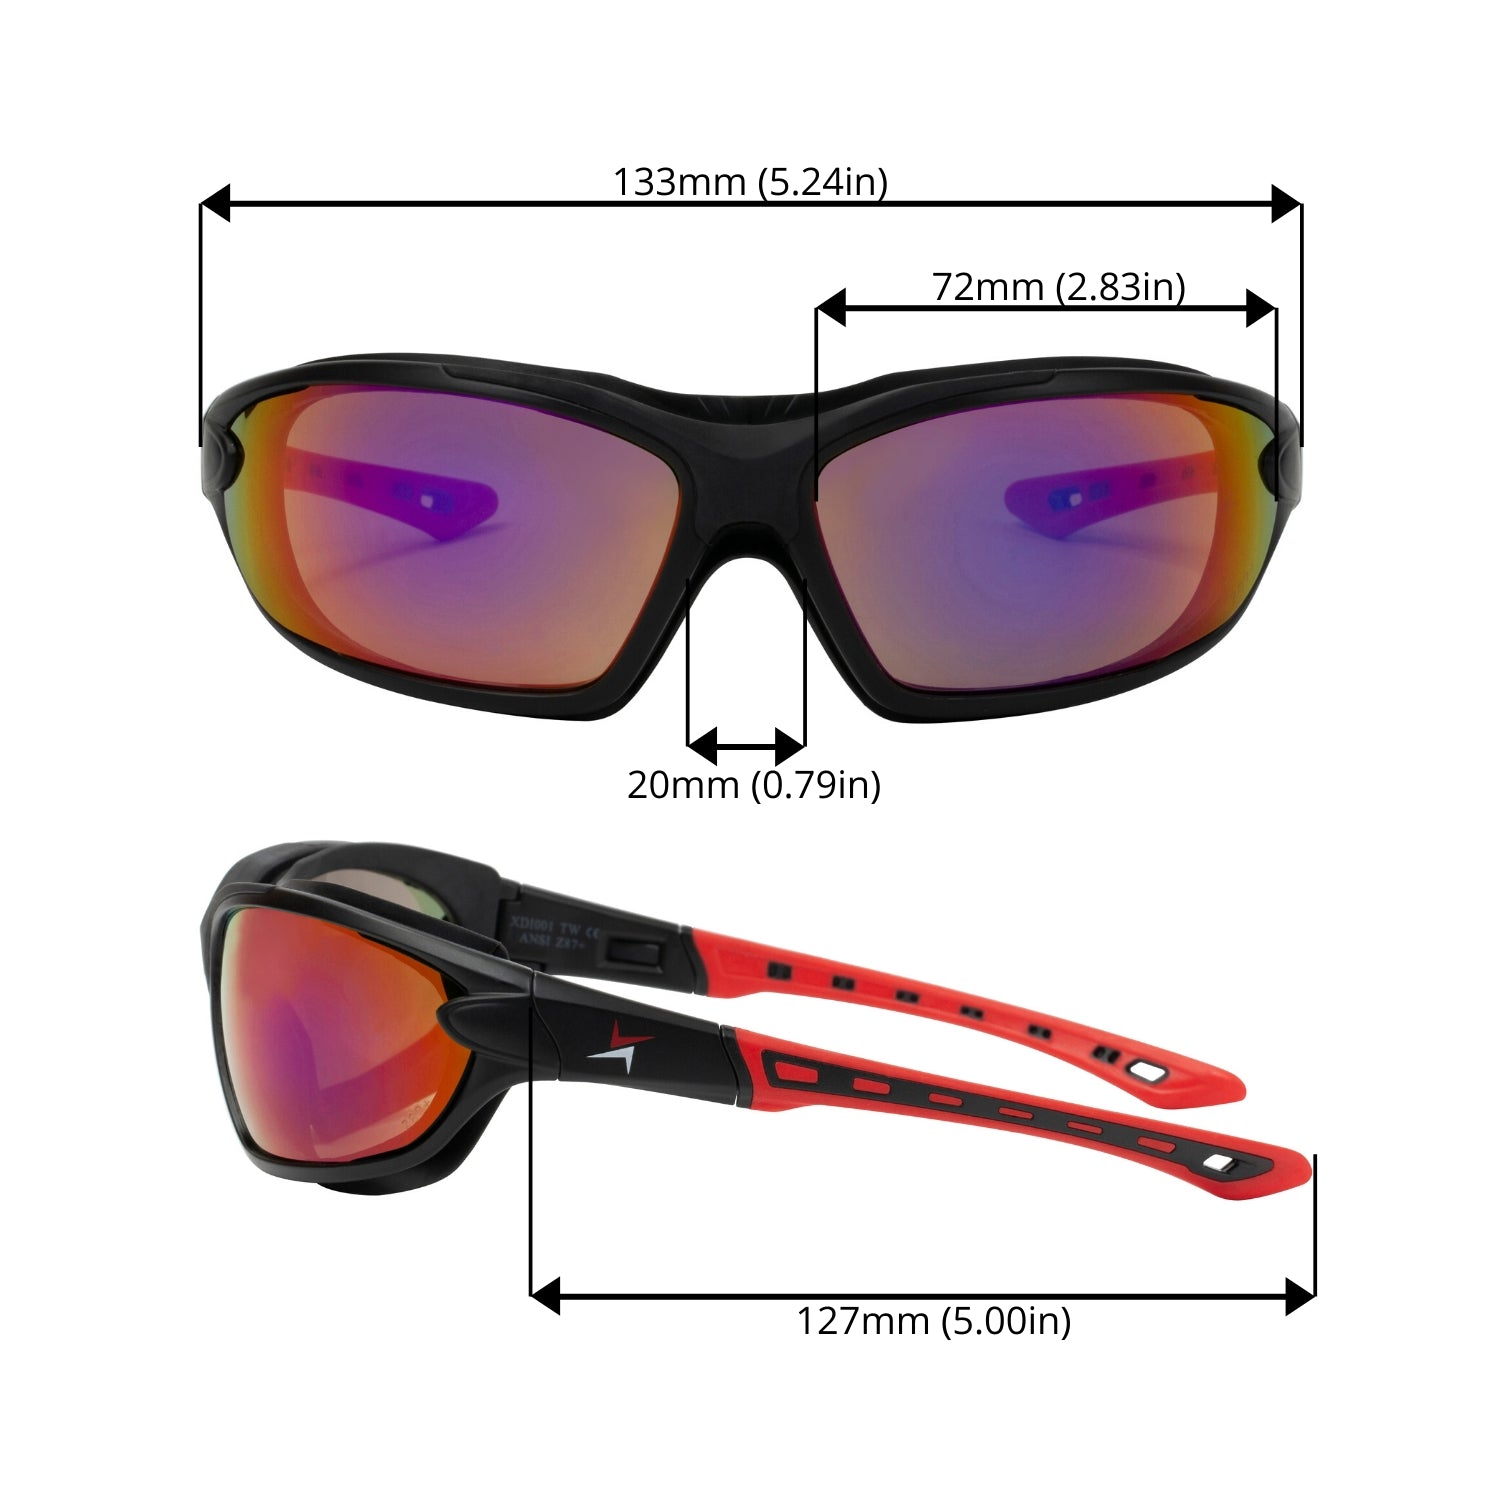 Polycarbonate Polarized Red Mirror Lens Sport Safety Sunglasses with Swappable Strap and Gasketed Goggle Padding.